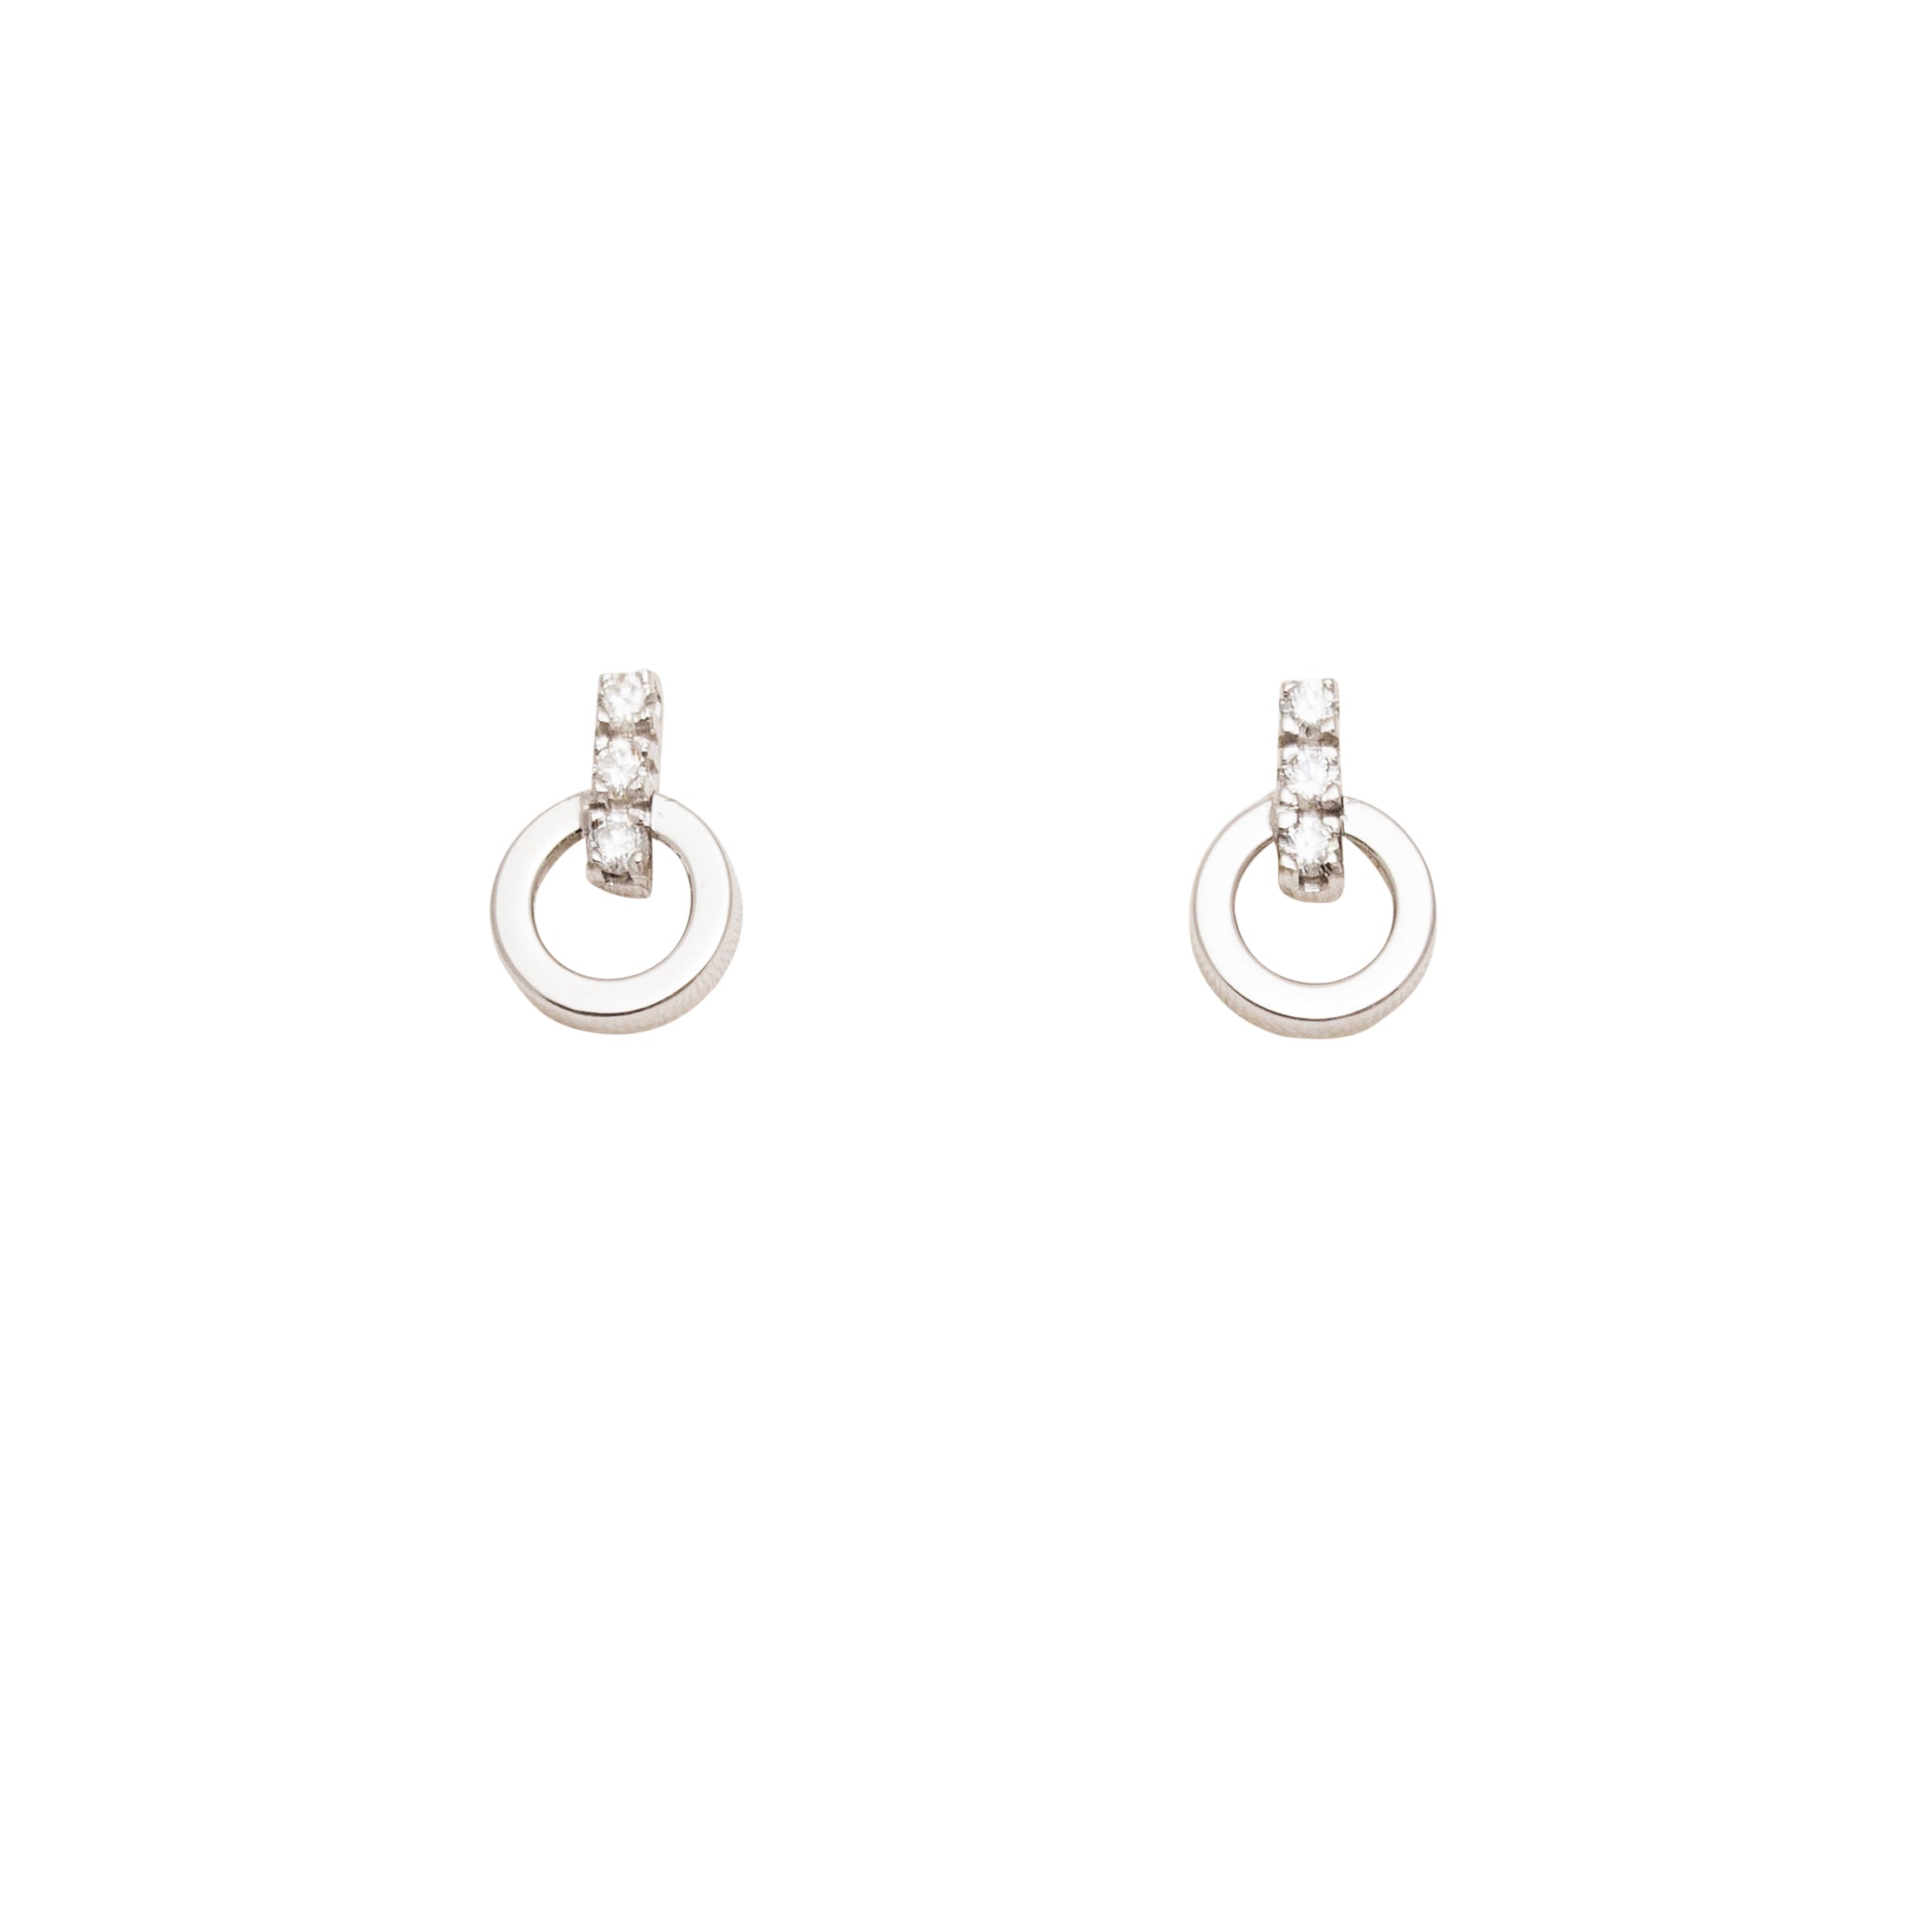 Luxurious 18k white gold and 6 gleaming diamonds make these drop earrings an exquisite addition to any outfit. Secure friction back posts promise lasting comfort and style. 11.50 mm long, these earrings are also available in yellow gold.